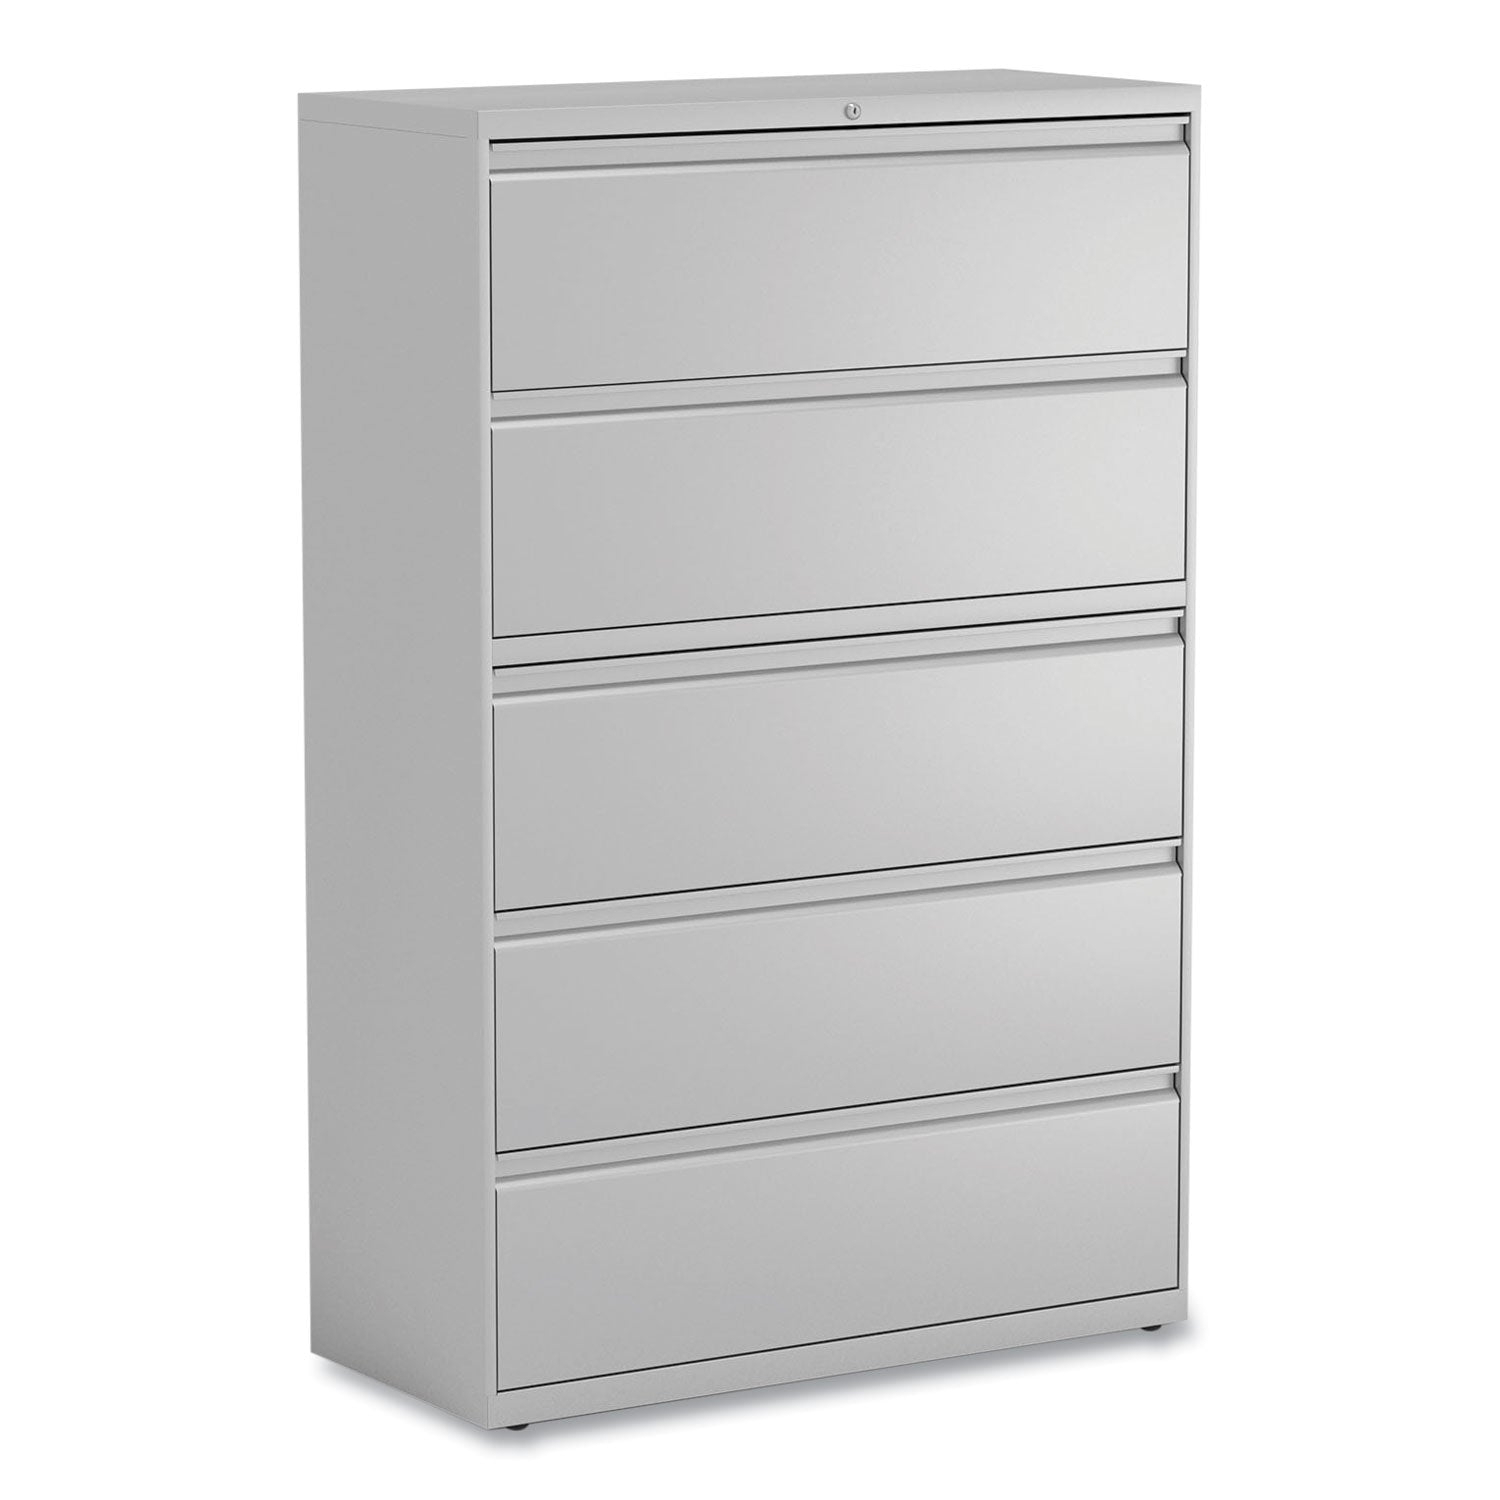 lateral-file-5-legal-letter-a4-a5-size-file-drawers-1-roll-out-posting-shelf-light-gray-42-x-1863-x-6763_alehlf4267lg - 1